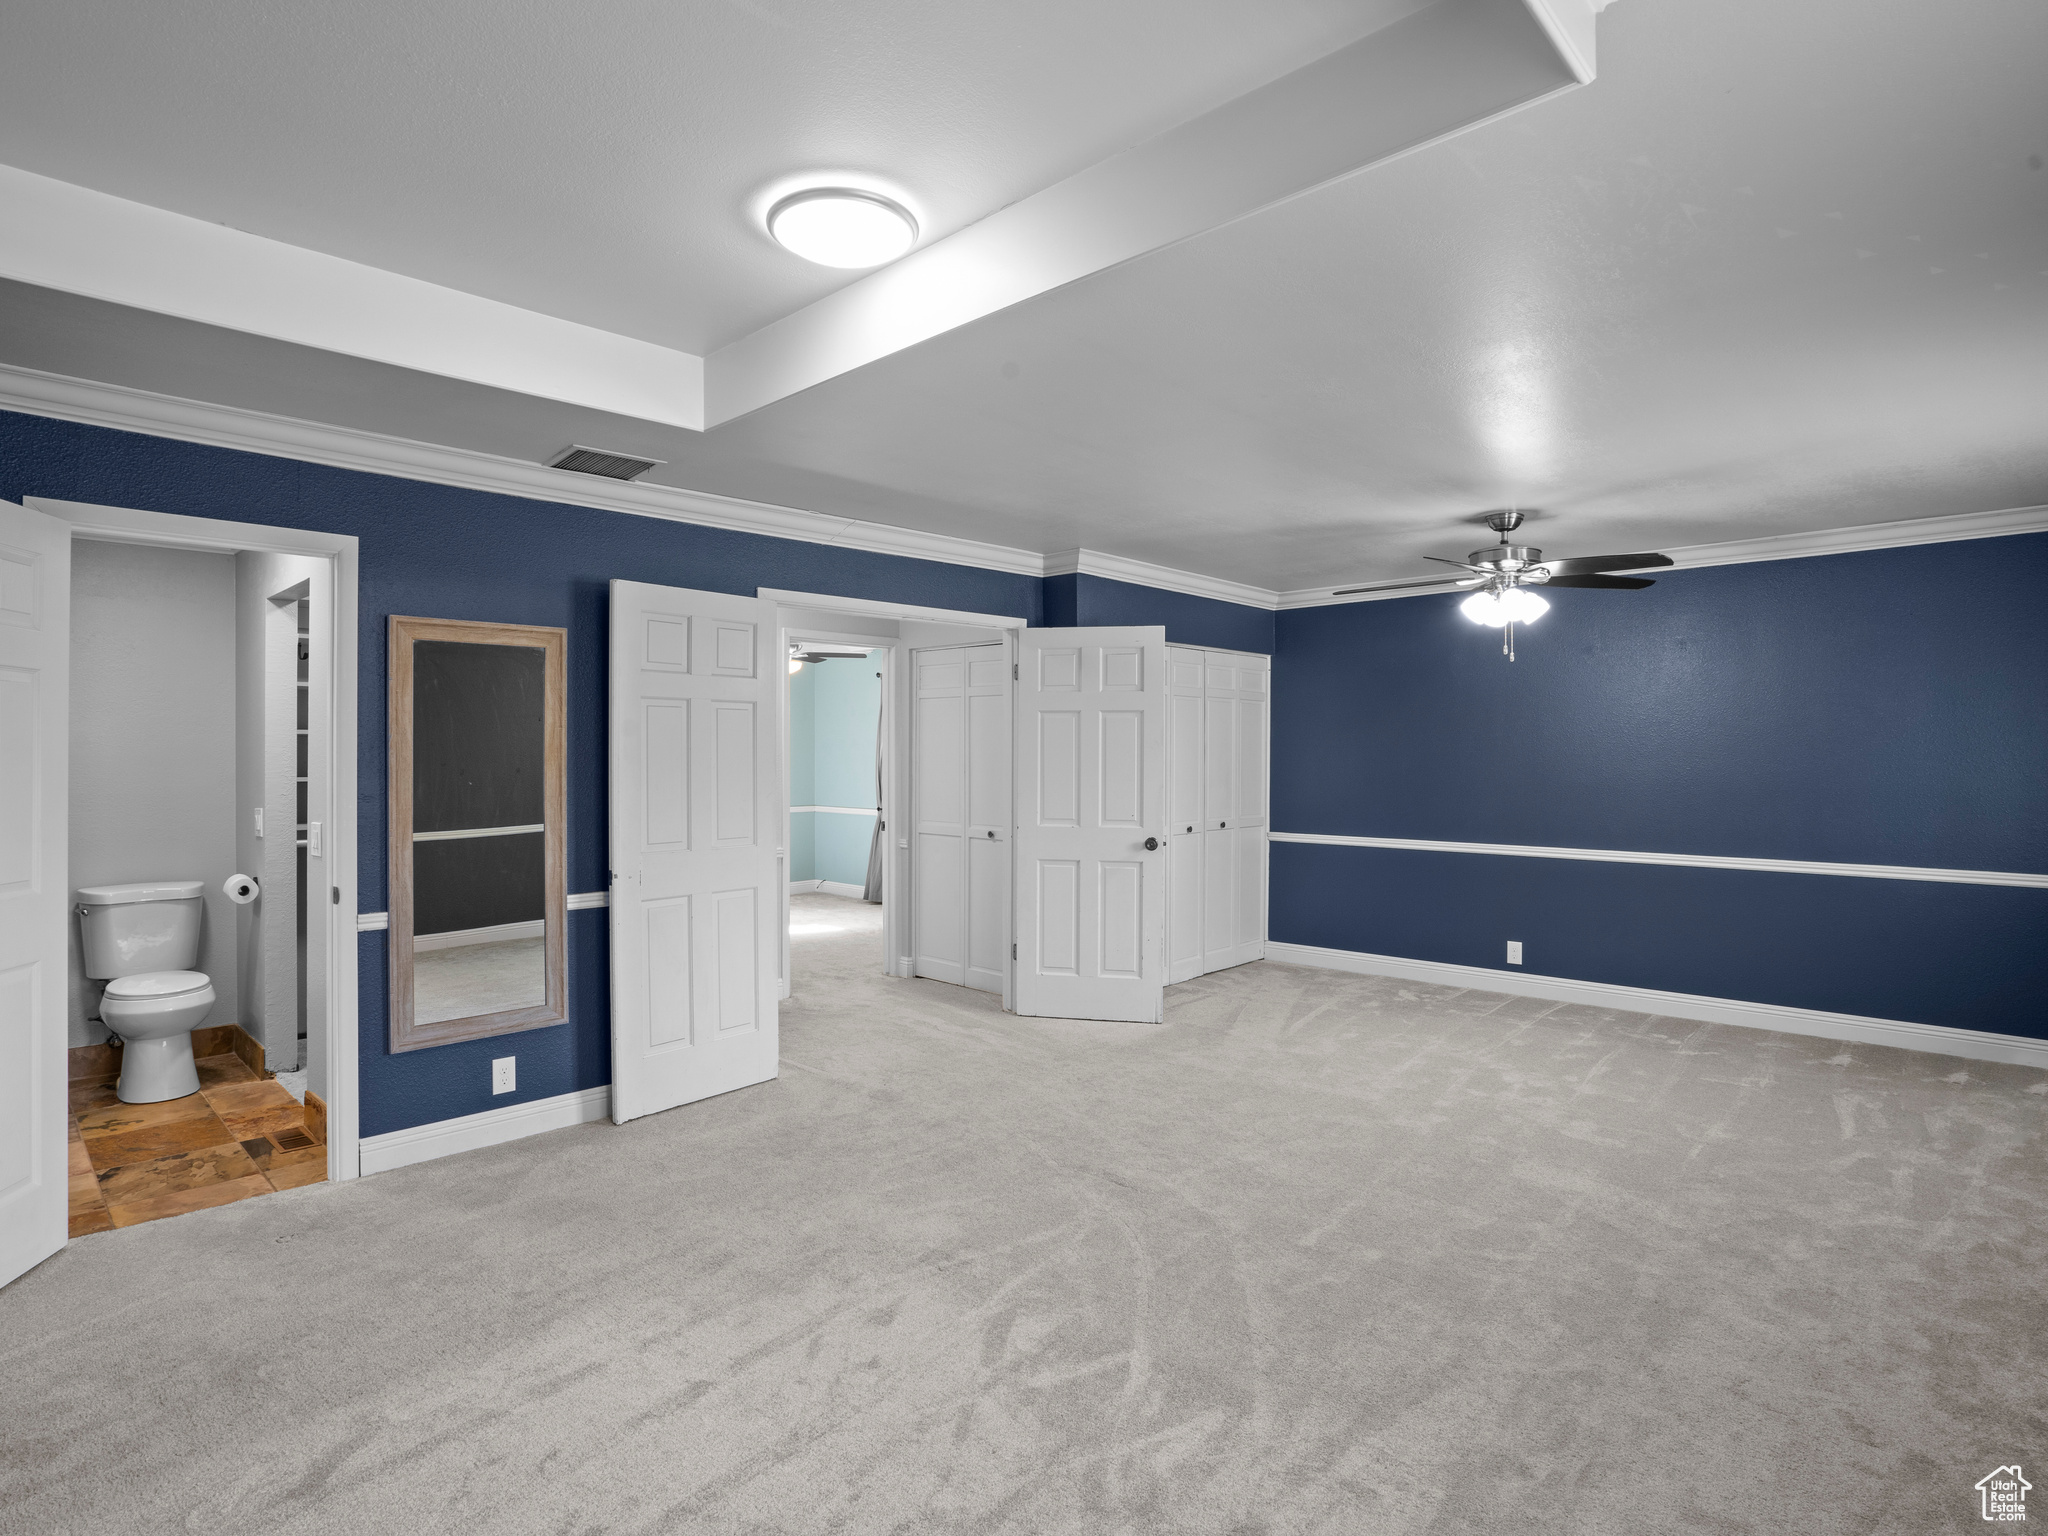 Interior space featuring ceiling fan and crown molding